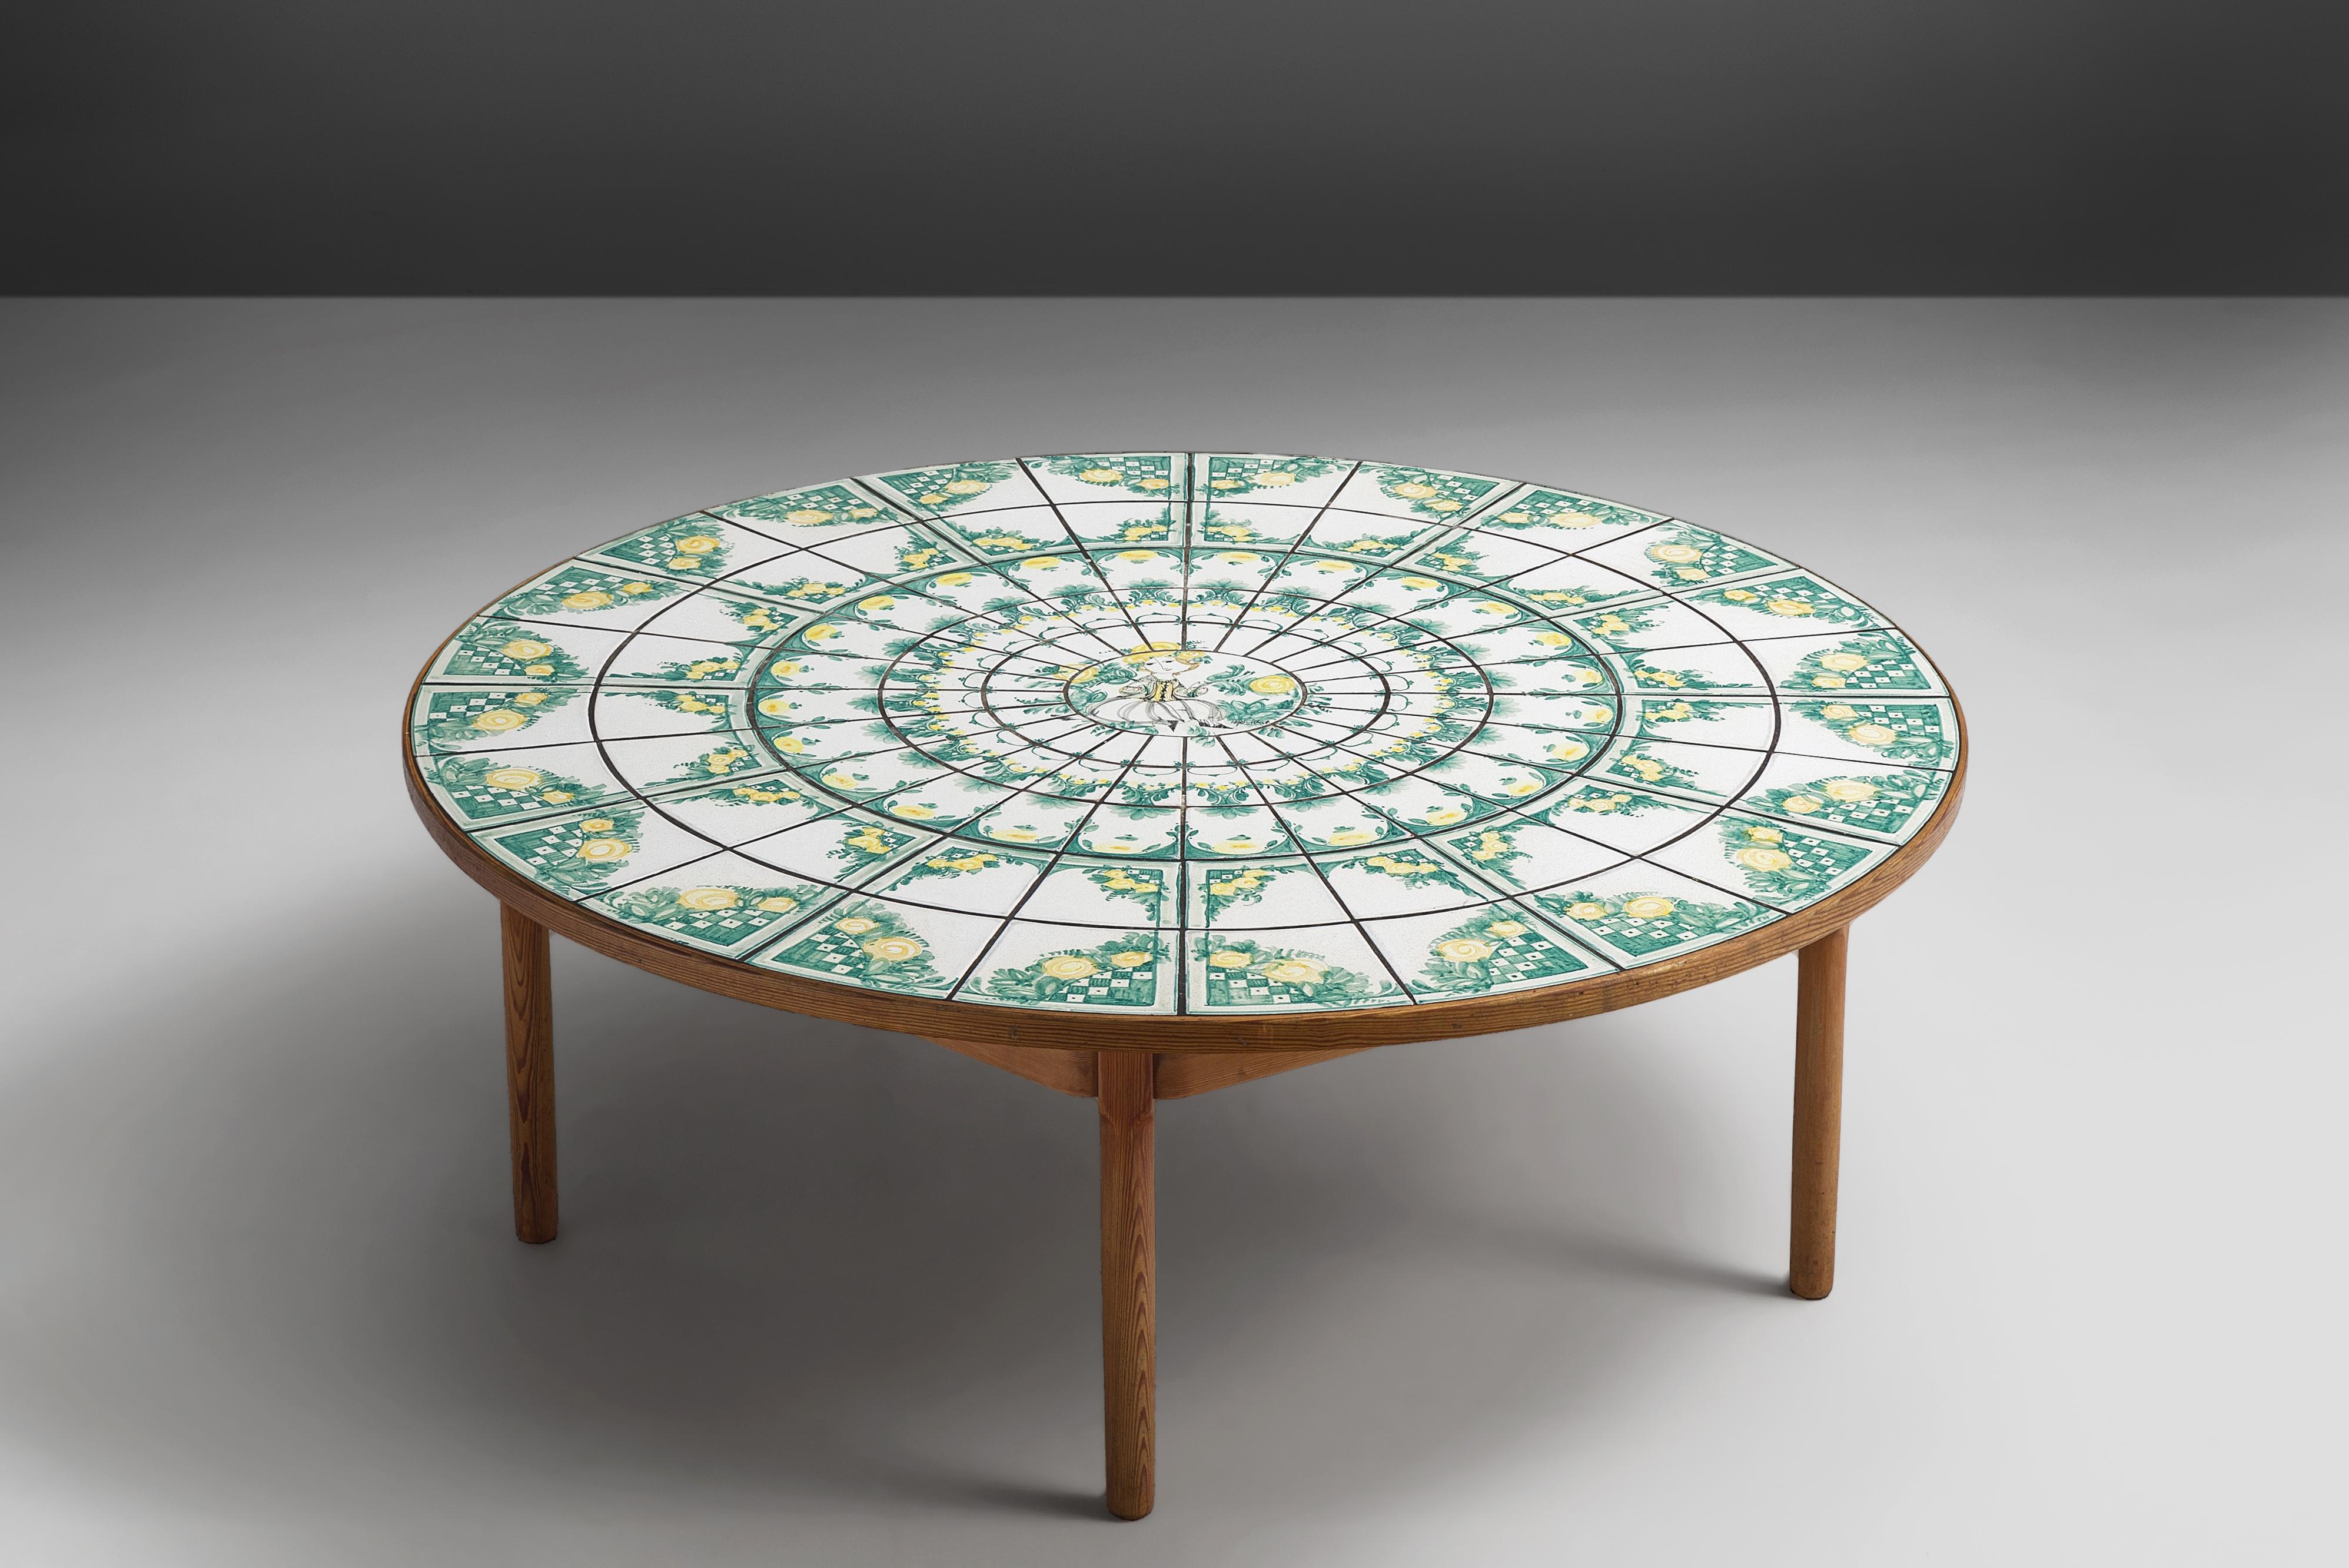 Bjørn Wiinblad, coffee table, ceramic tiles, wood, Denmark, 1970s

This ceramic coffee table is decorated with hand painted ceramic tiles in twining vines, floral wreaths and trees in green and white. In the center a human figure decorates the